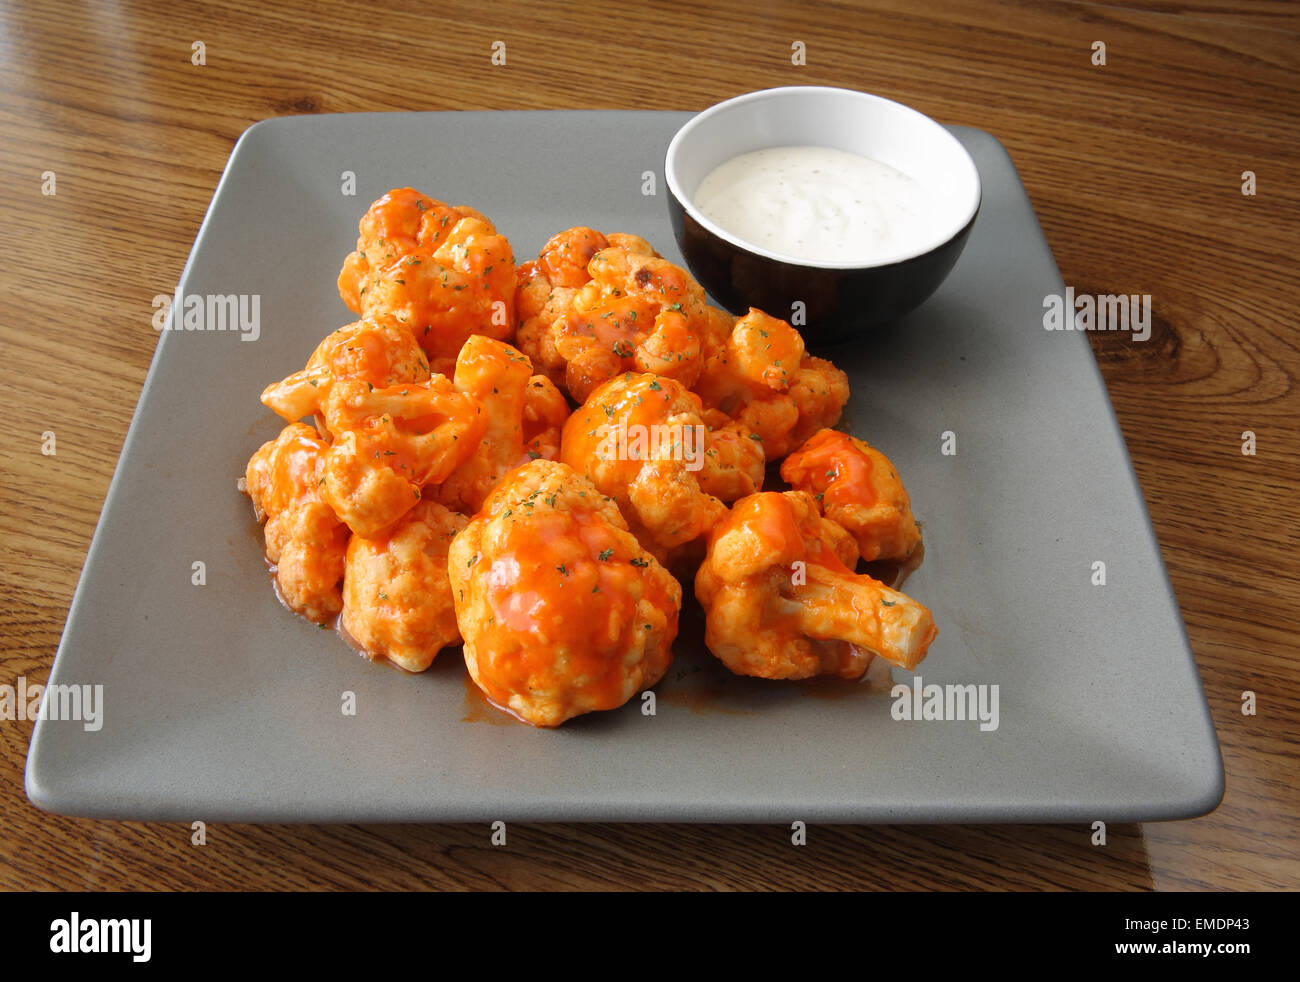 buffalo-style cauliflower piled up on a plate with ranch dipping sauce Stock Photo